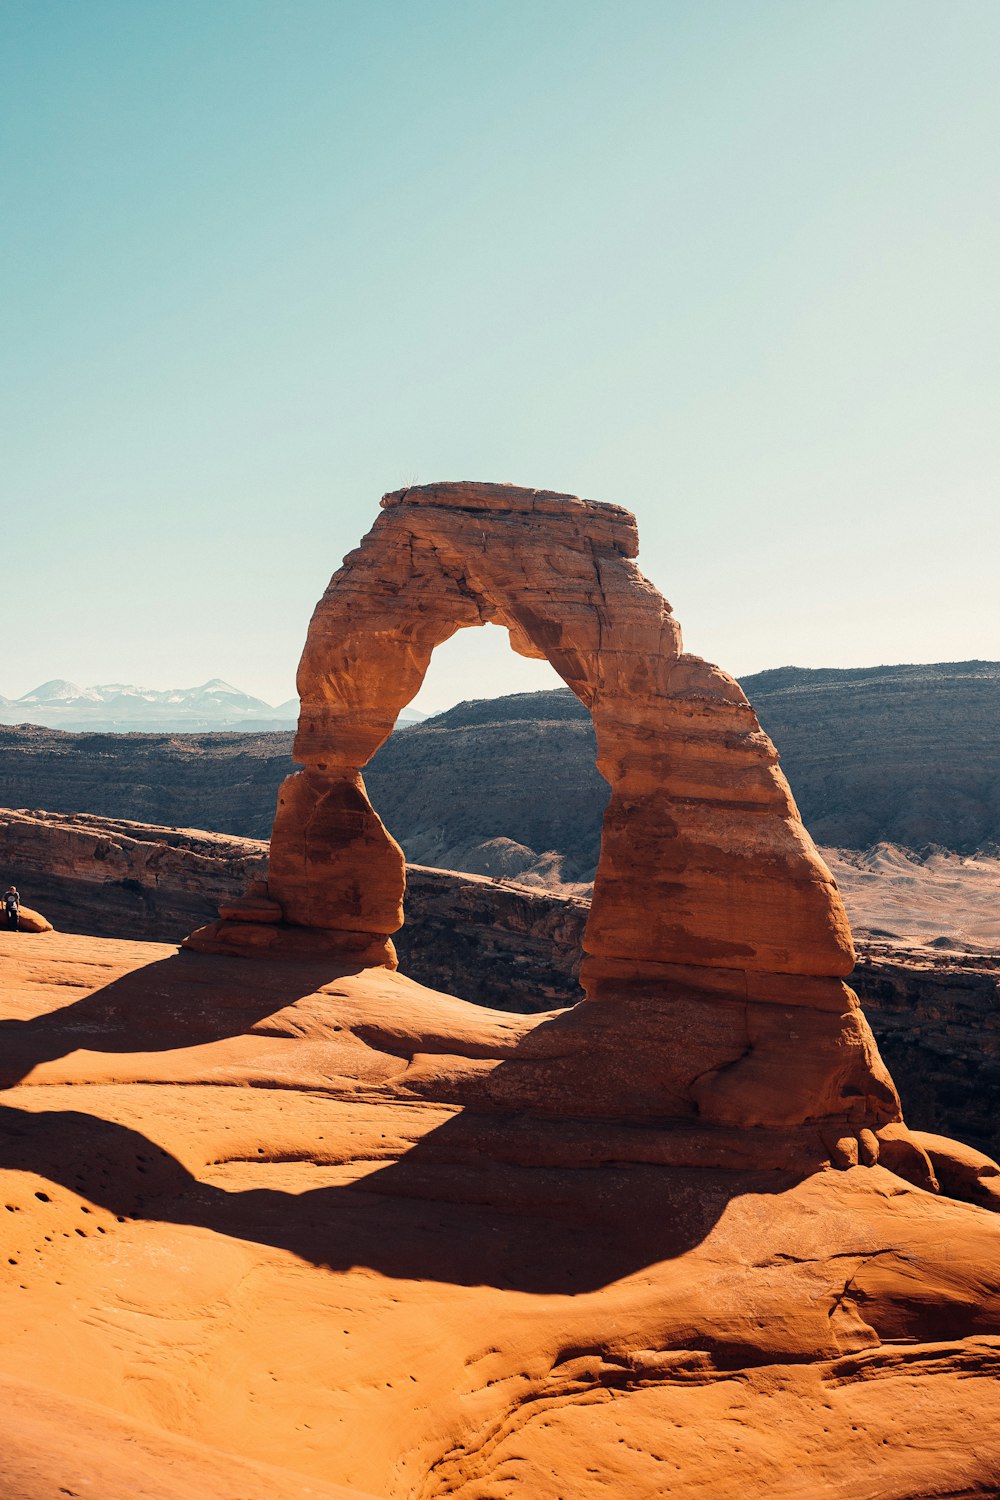 a large rock formation in the desert with Arches National Park in the background